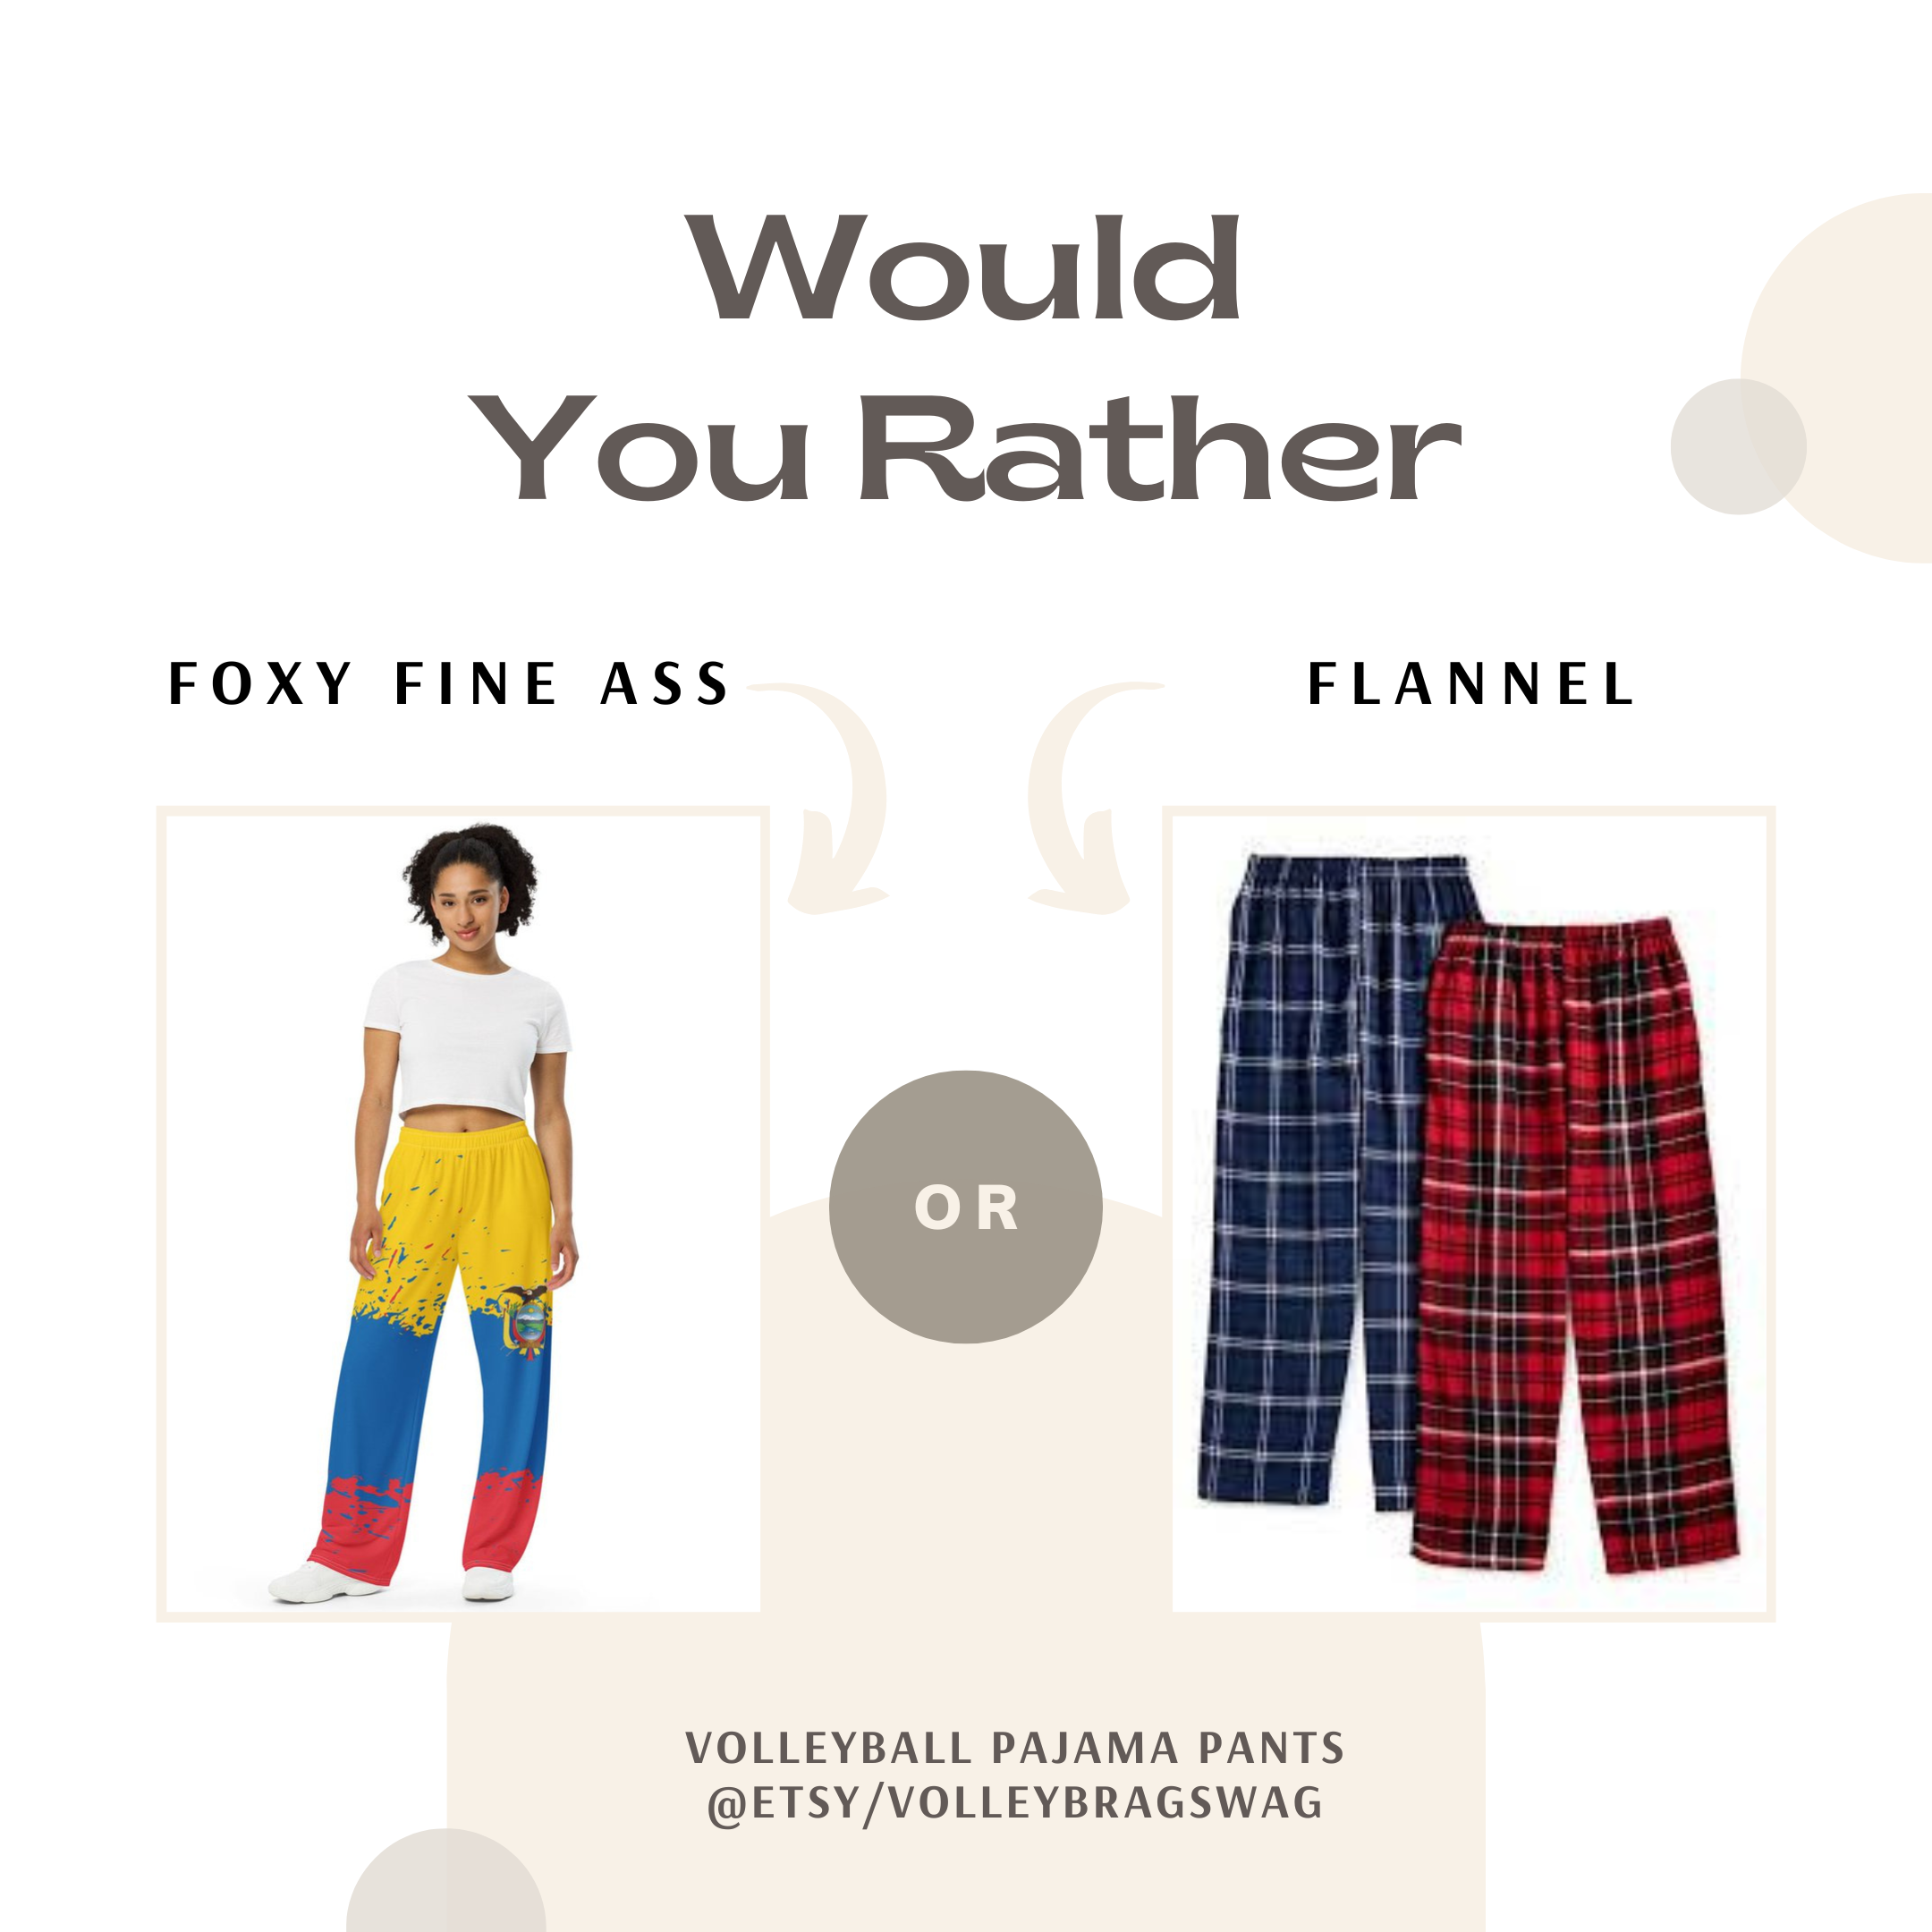 Need a pair of fine foxy beach volleyball pants that can handle any type of exercise, check out the Volleybragswag volleyball pj pants on ETSY that volleyball players love to love.